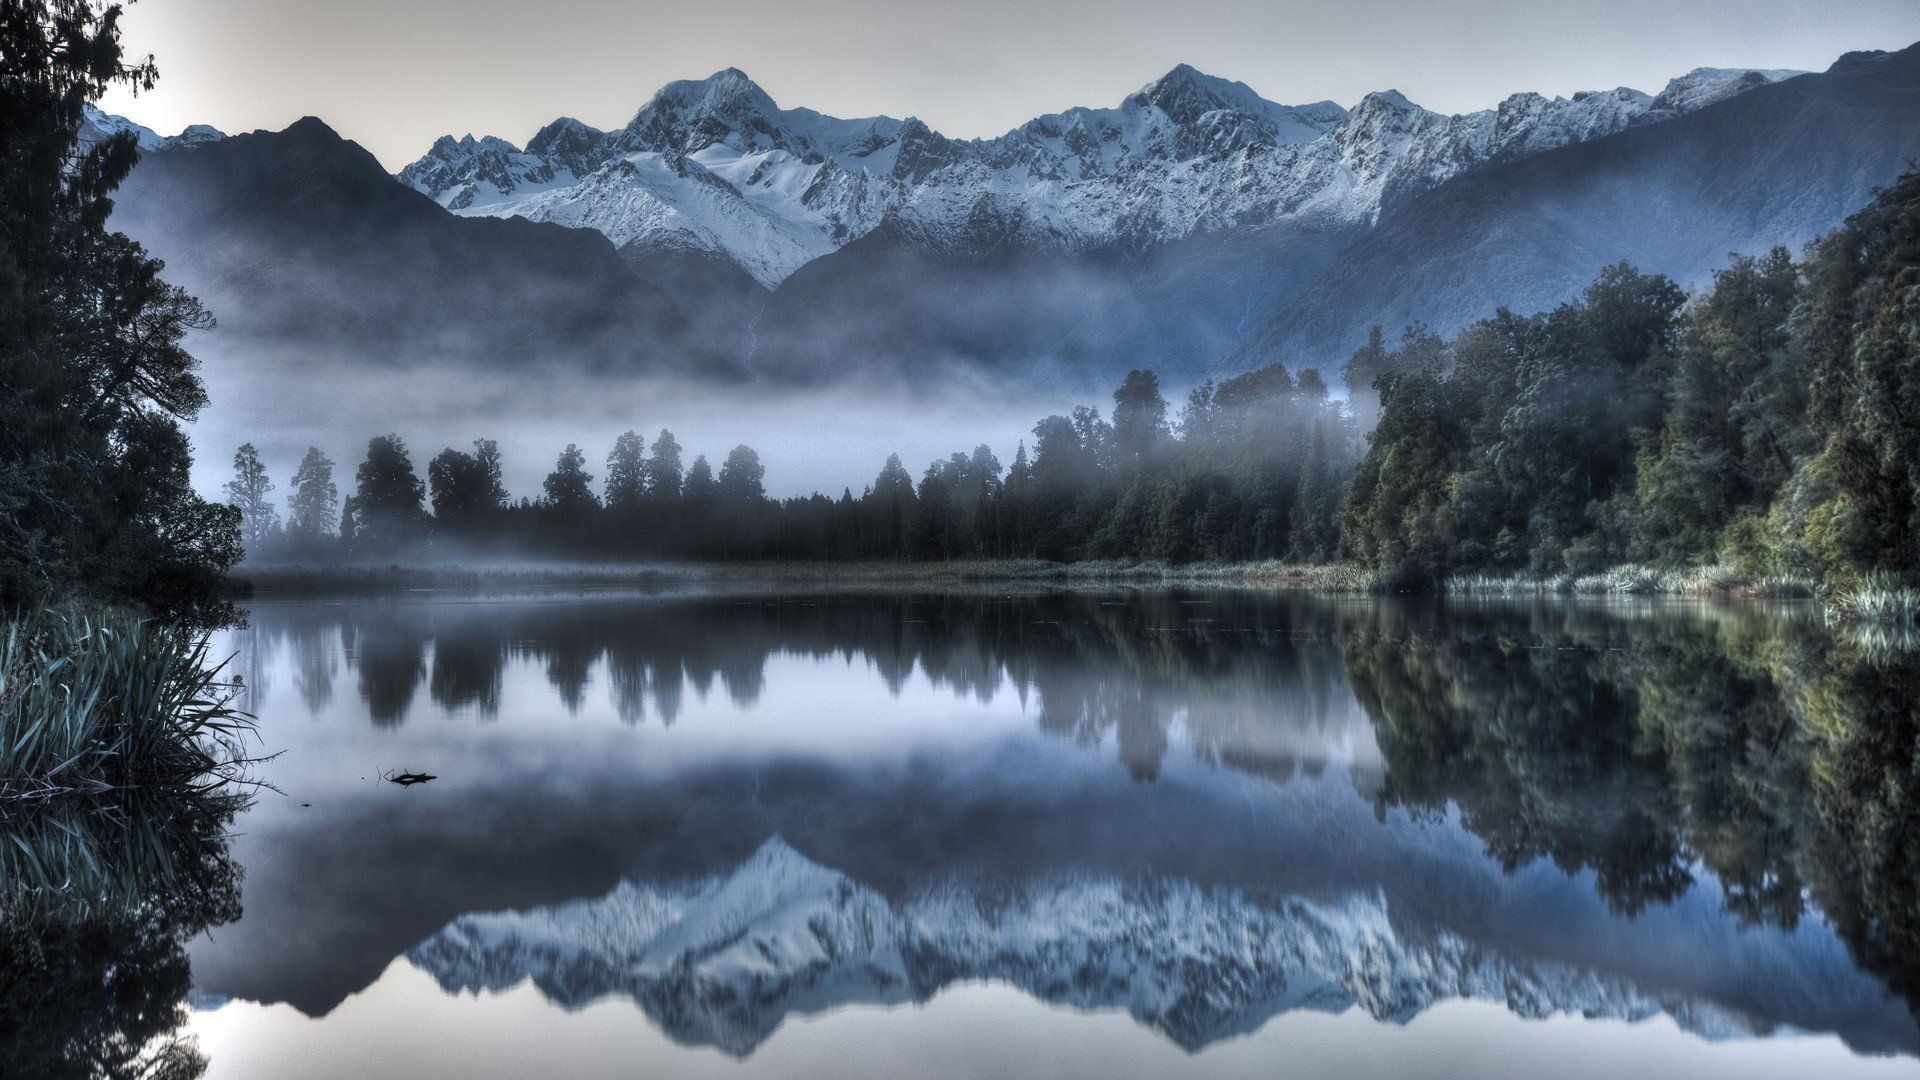 40 Full Hd New Zealand Wallpapers For Free Download - Lake Matheson - HD Wallpaper 